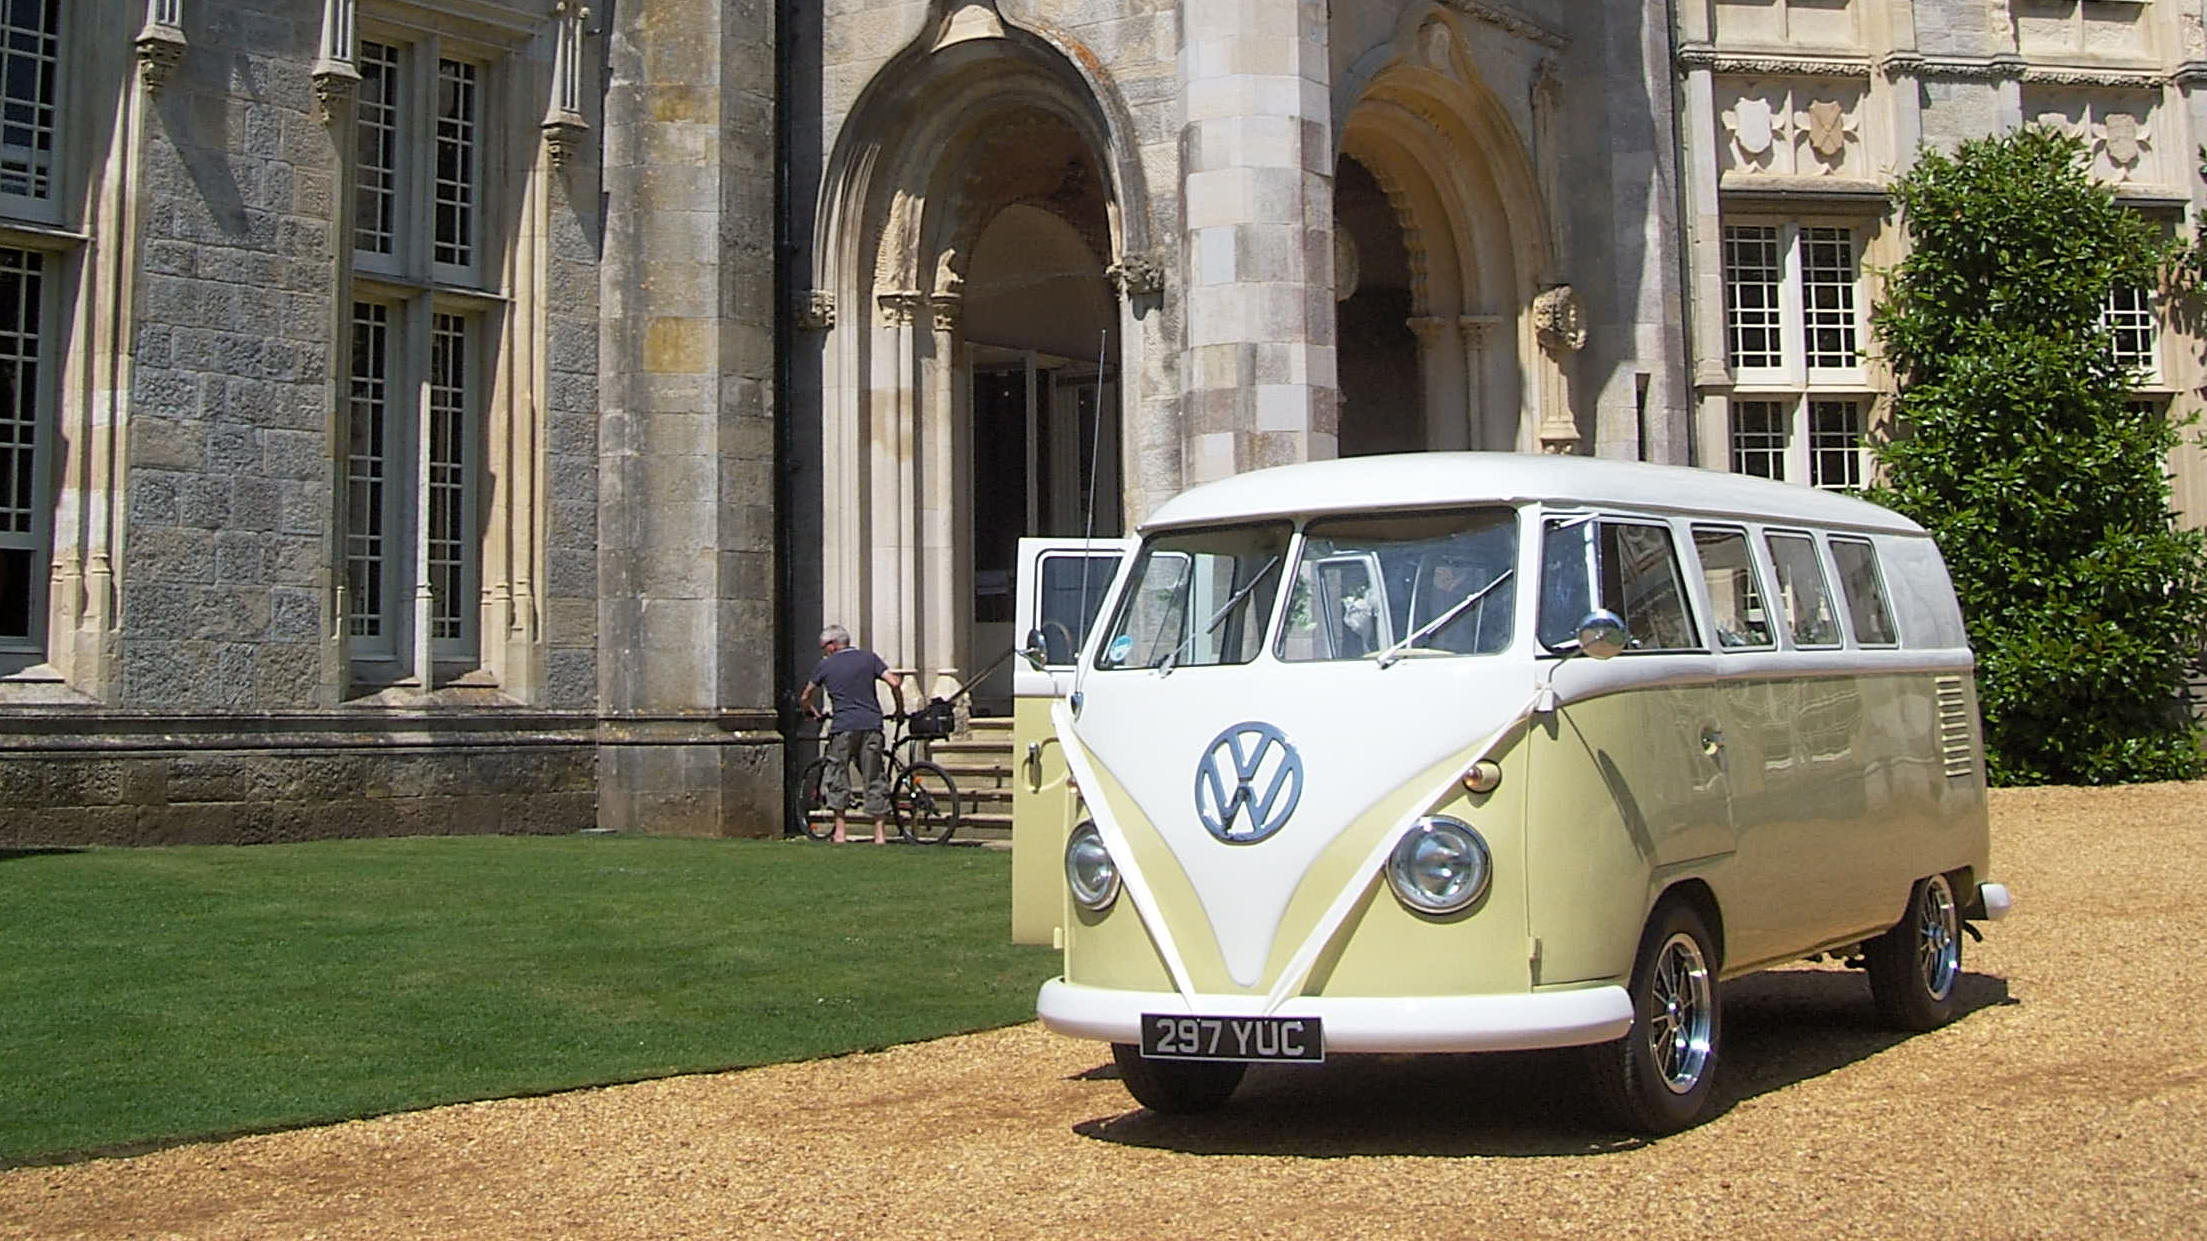 Retro Classic Volkswagen Campervan decorated with white ribbons at a local Moreton wedding venue.